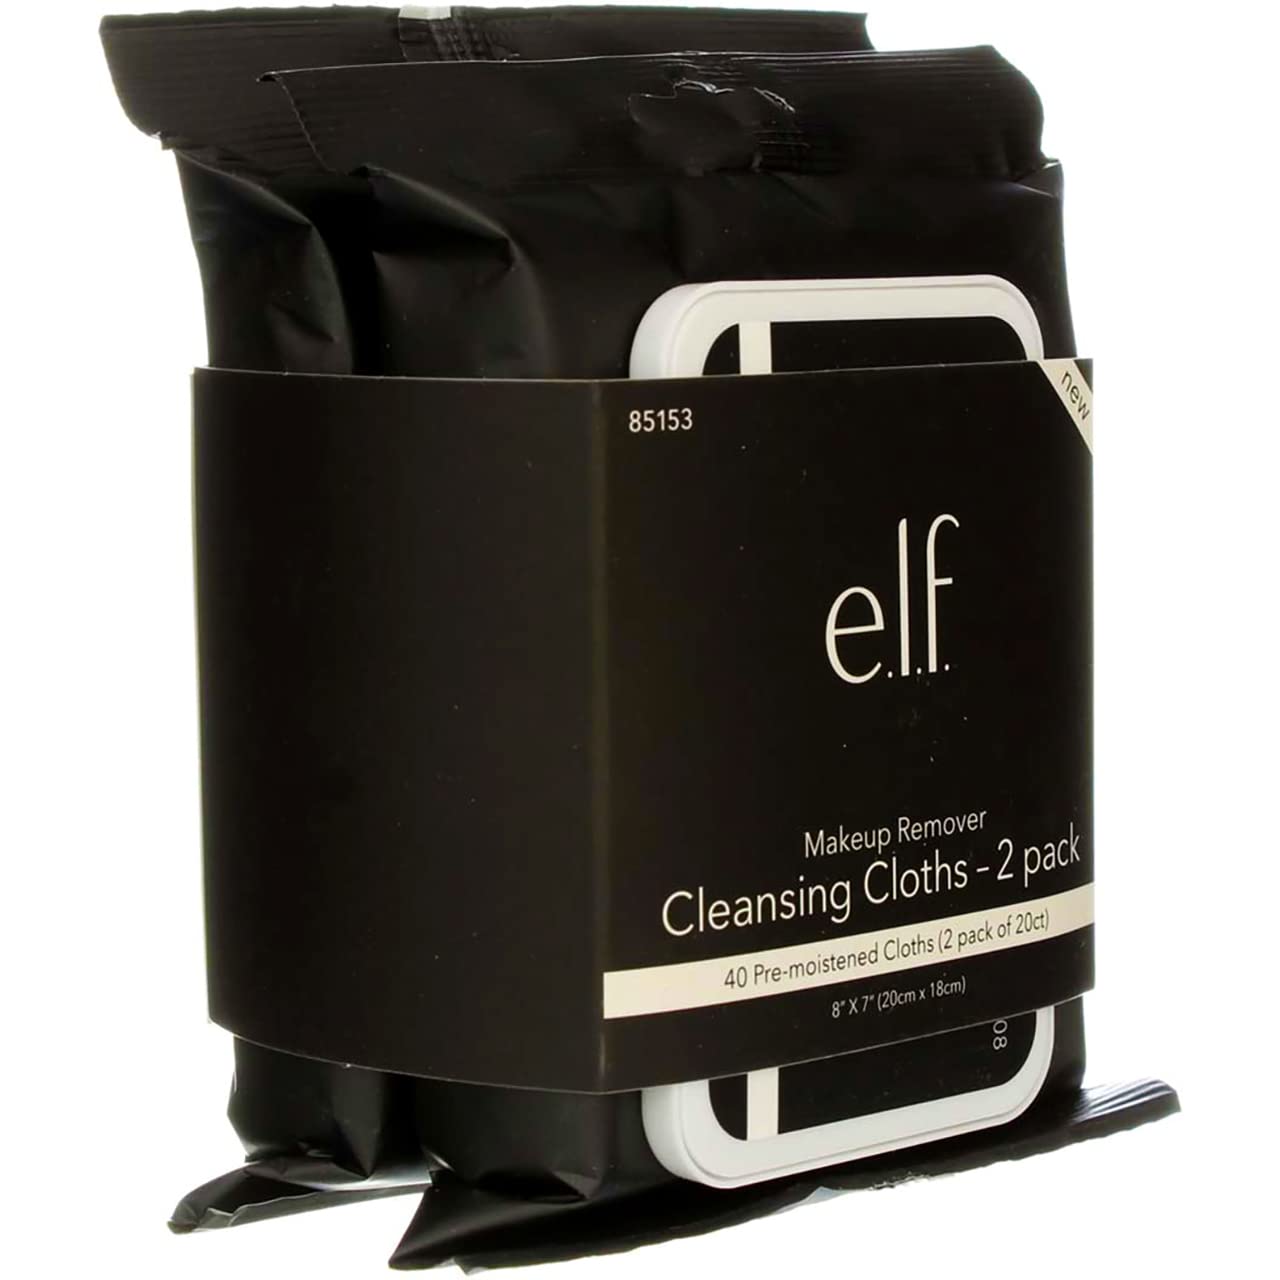 New Makeup Remover Cleansing Cloth by E.L.F Studio - 2 Packs of 20 Cloths each - 16.8oz (476g)